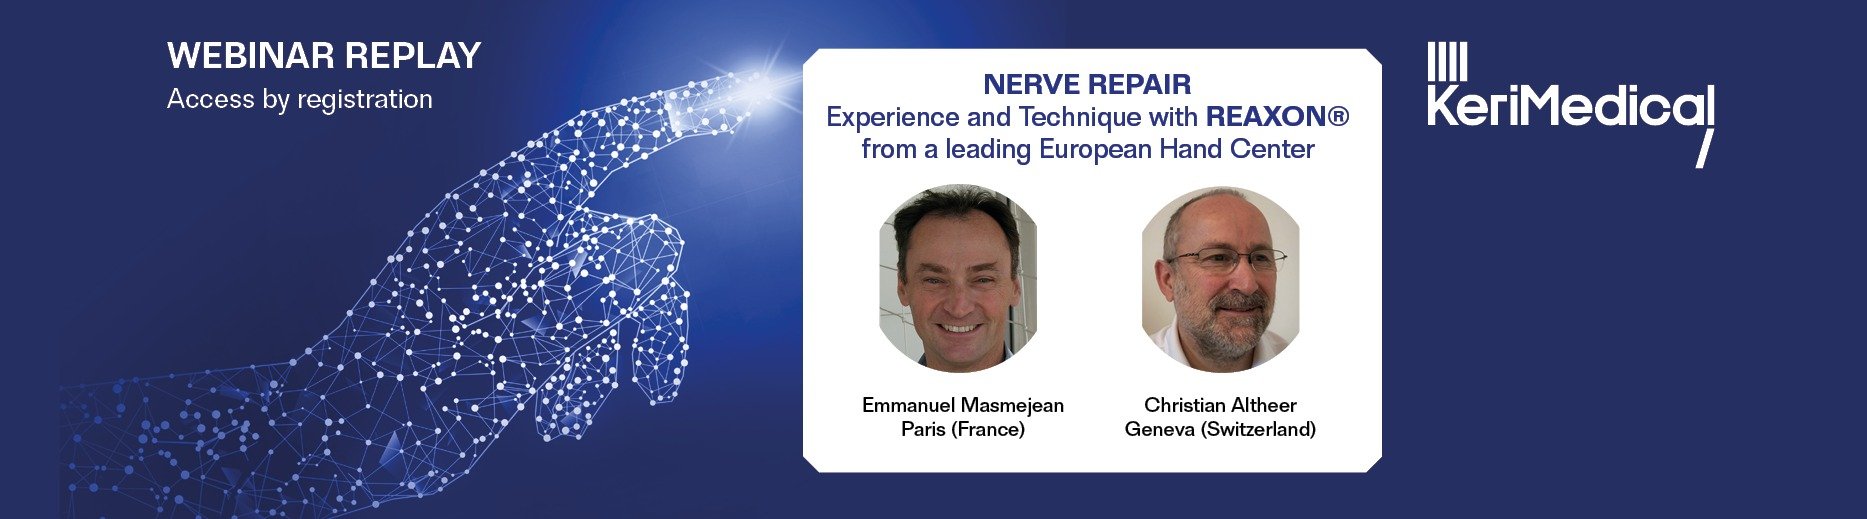 REPLAY : NERVE REPAIR - Experience and Technique with Reaxon® from a leading European Hand Center